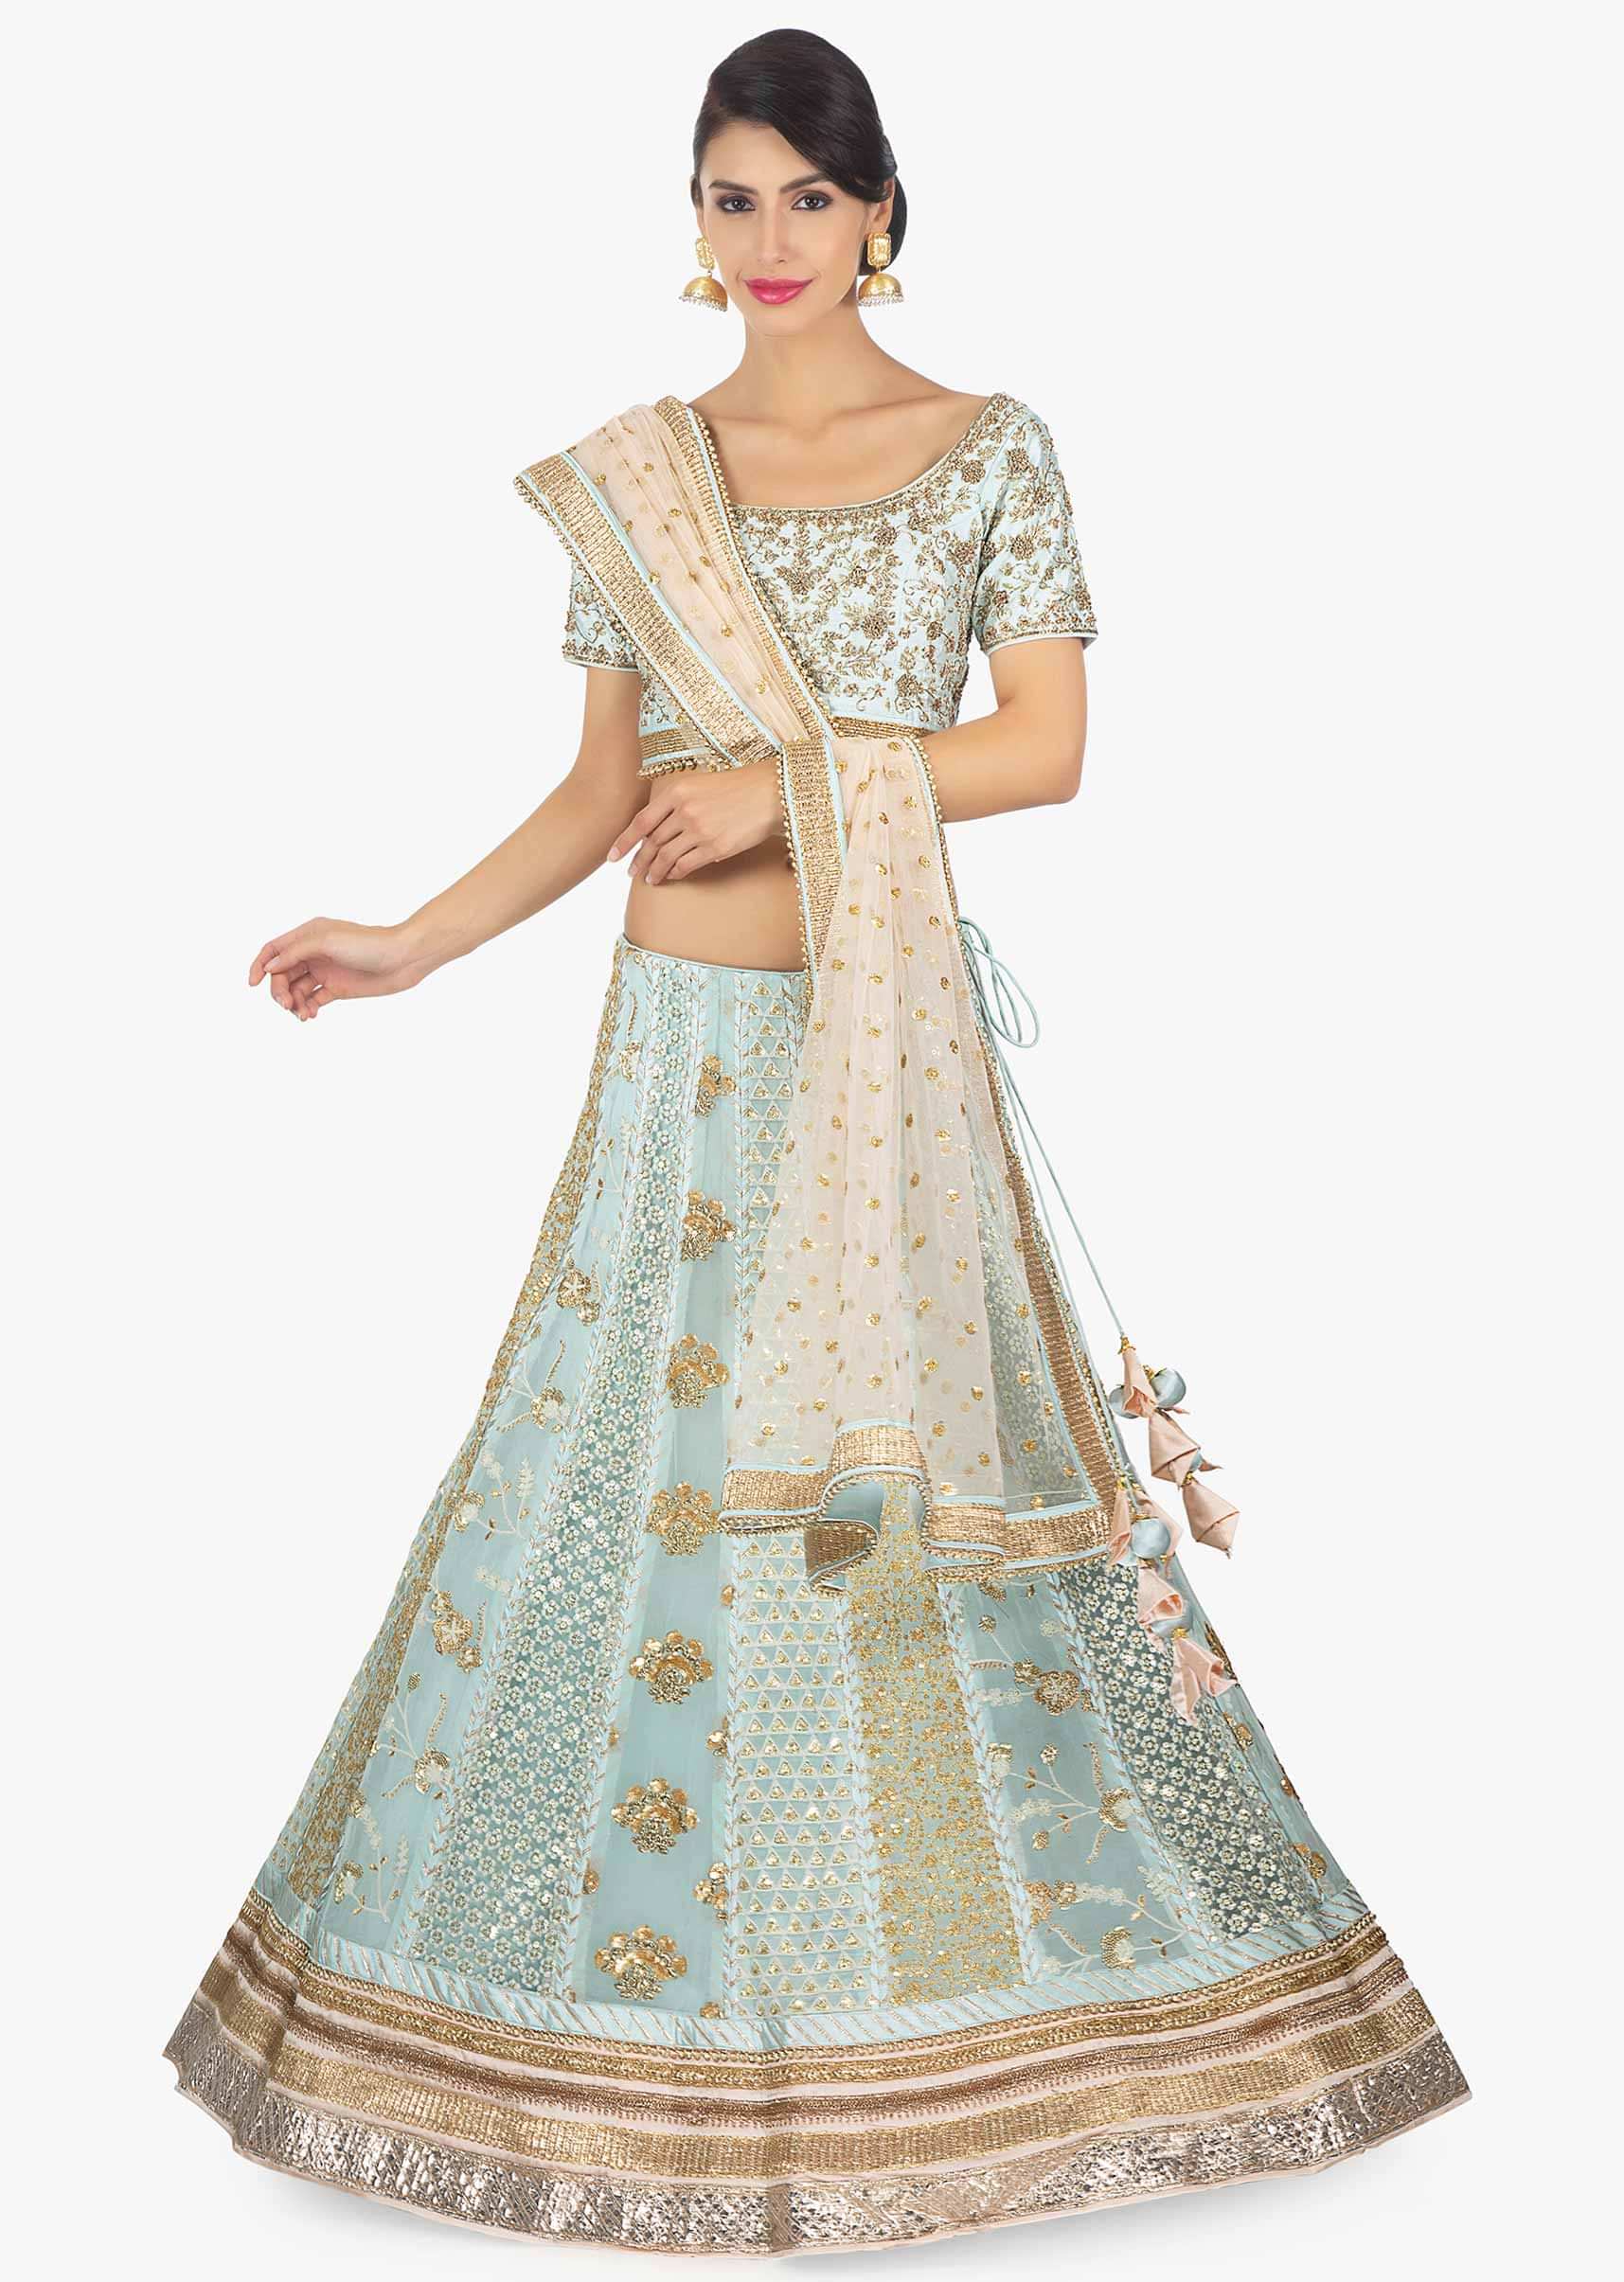 Mint green raw silk blouse paired with georgette lehenga in alternate kali along with a cream net dupatta